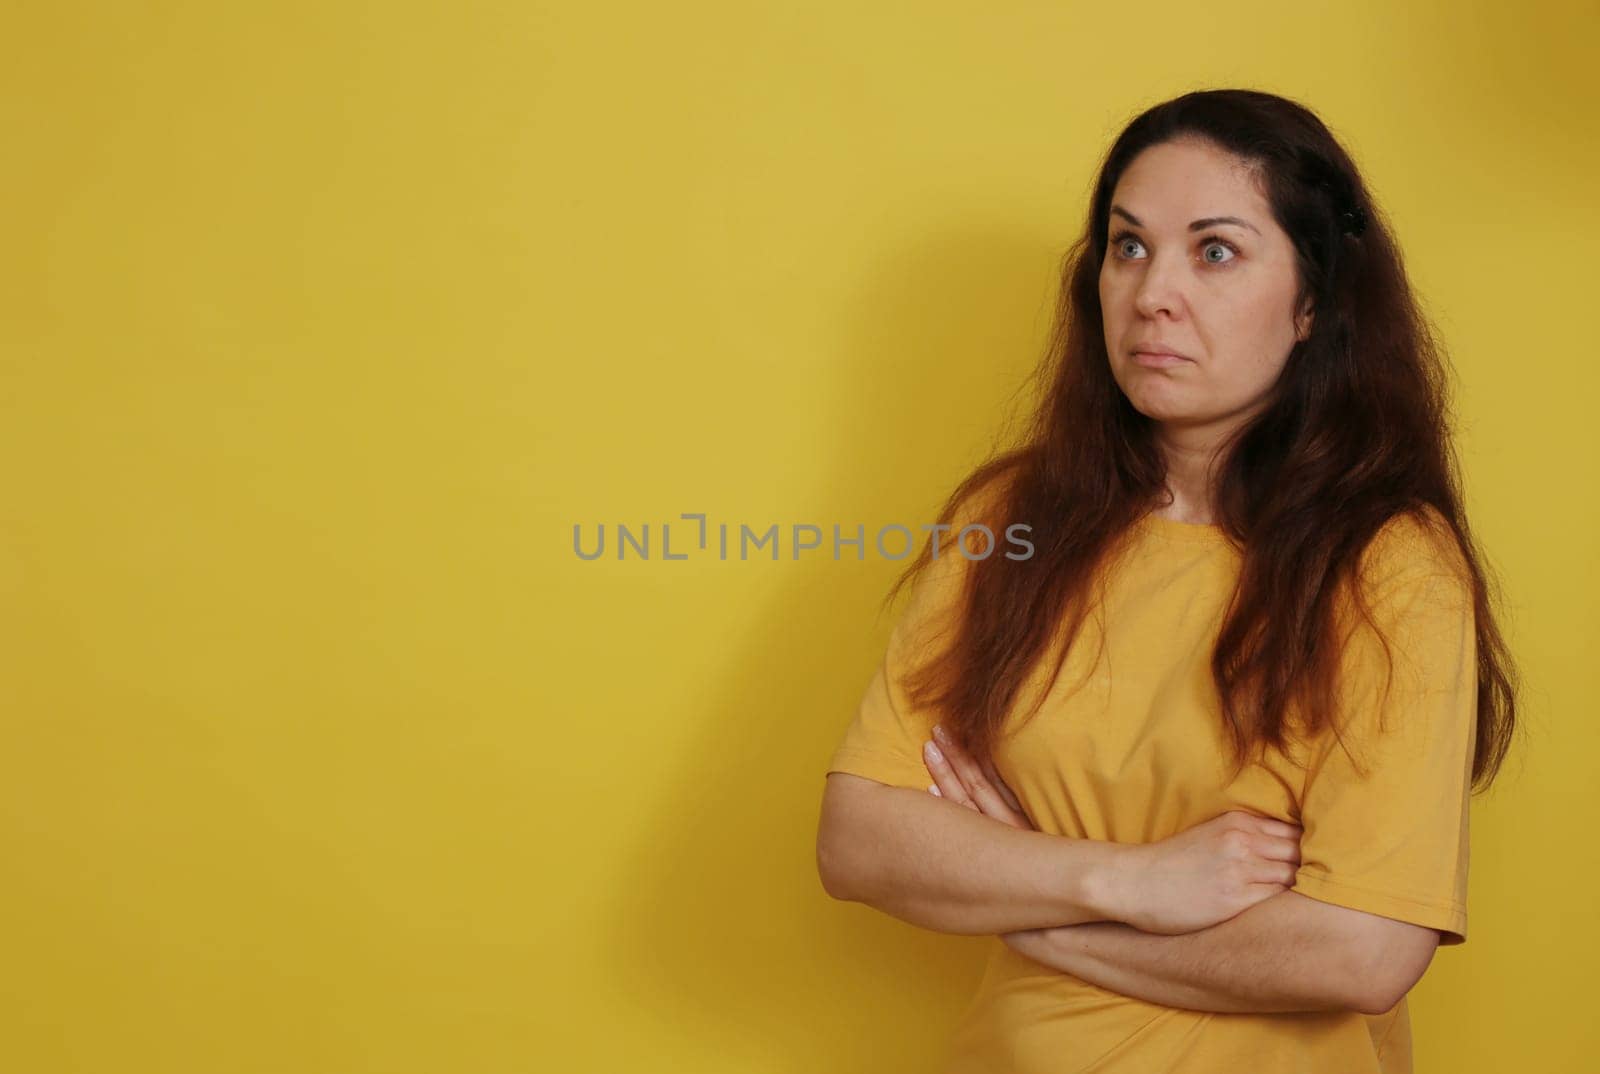 A pretty brunette woman in a yellow T-shirt in a state of bewilderment and consternation.